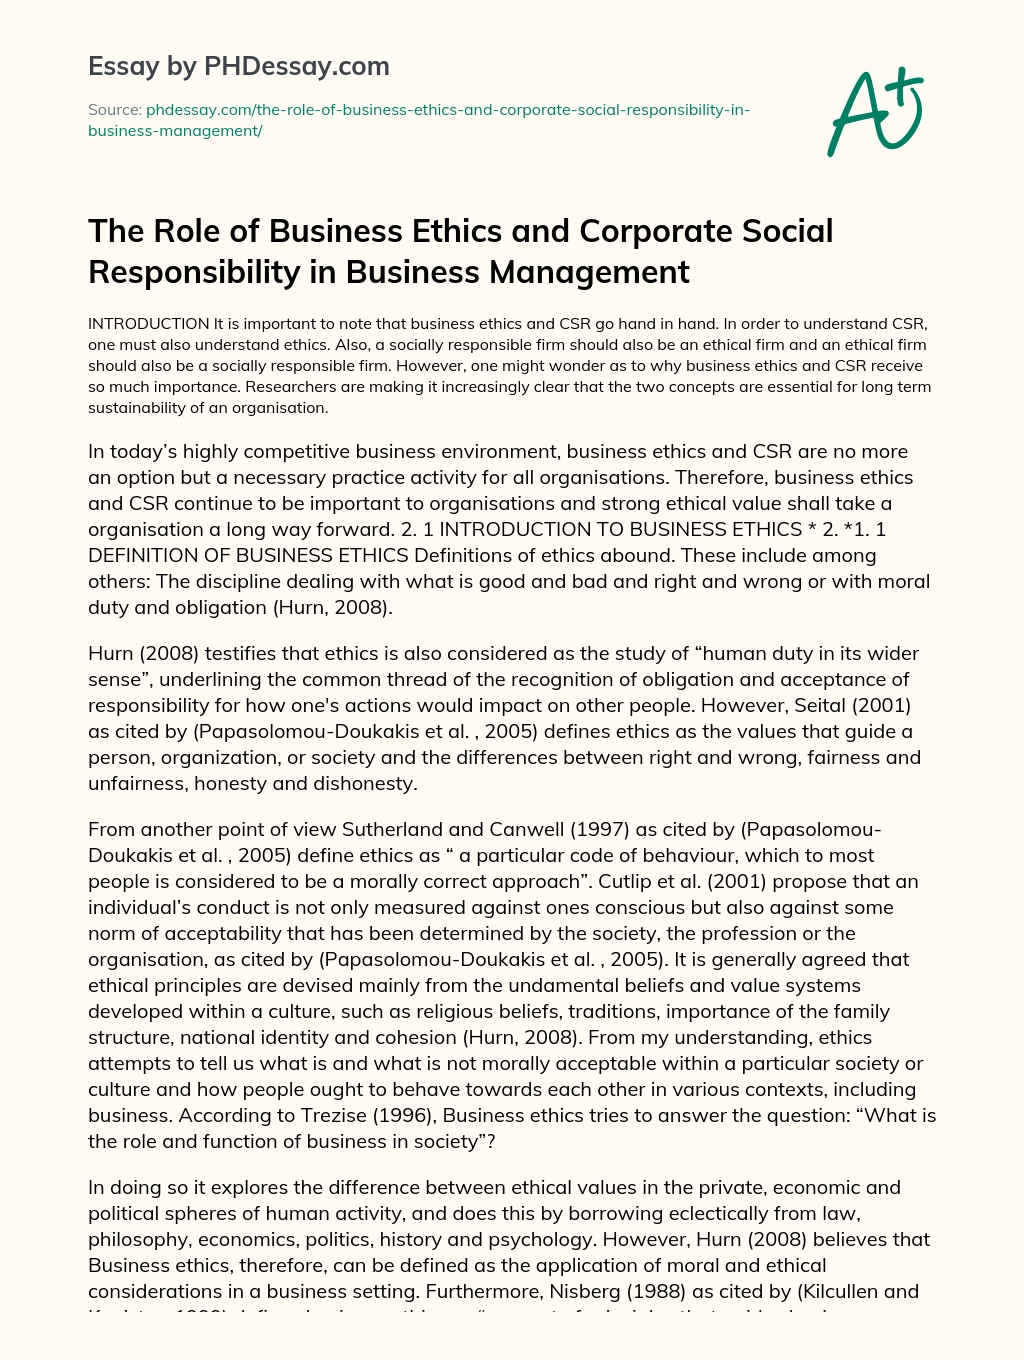 The Role of Business Ethics and Corporate Social Responsibility in Business Management essay